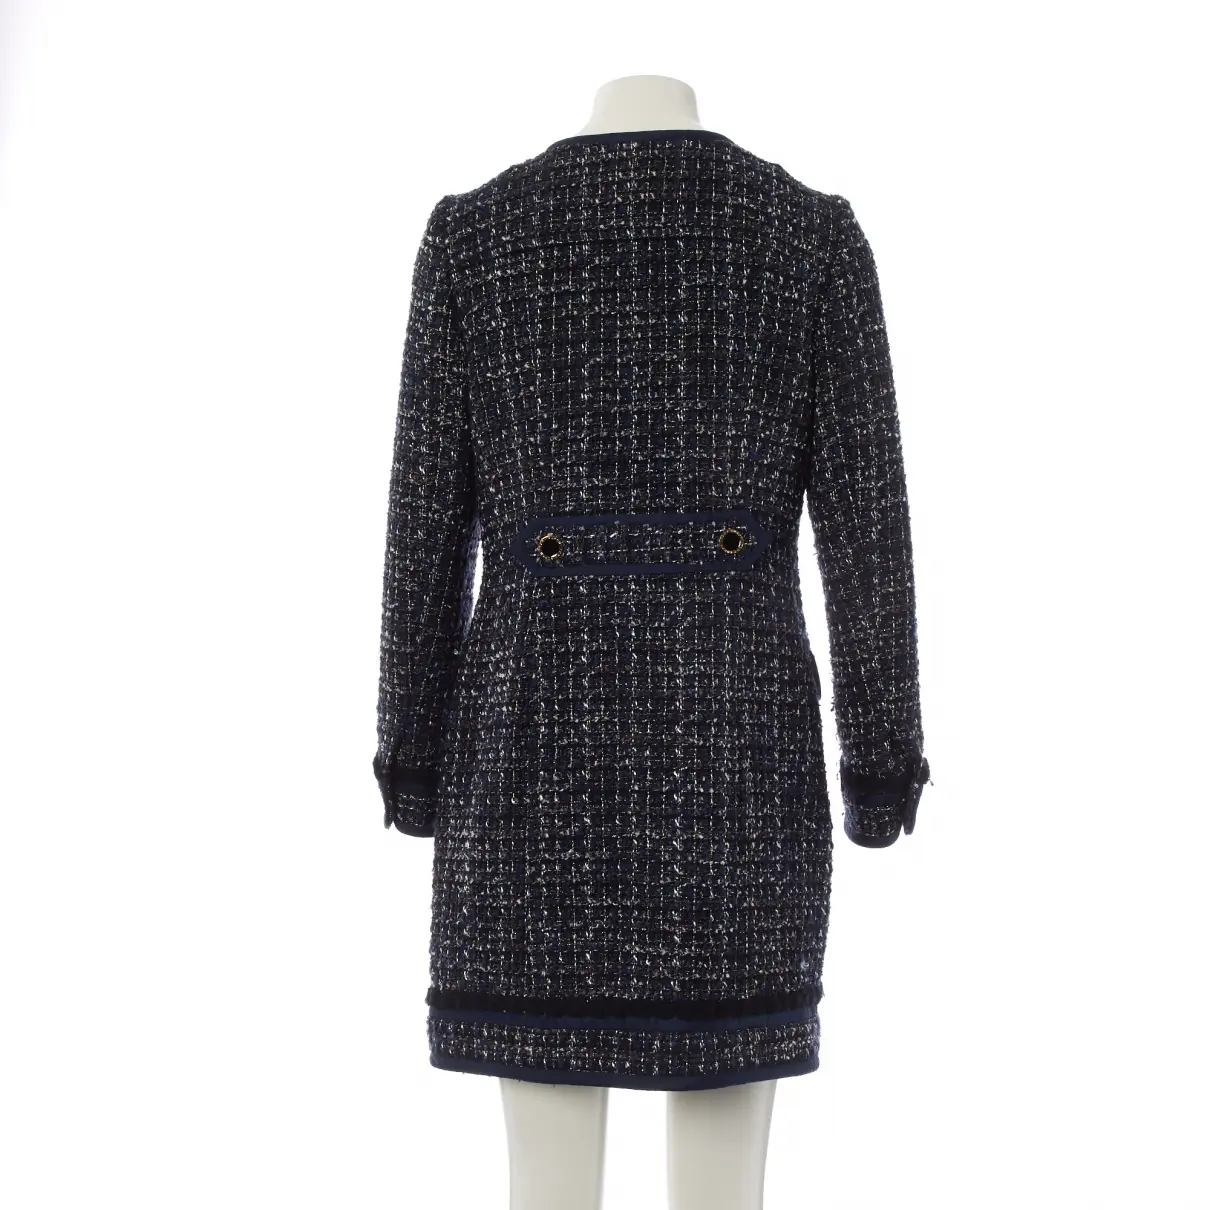 Tory Burch Wool jacket for sale